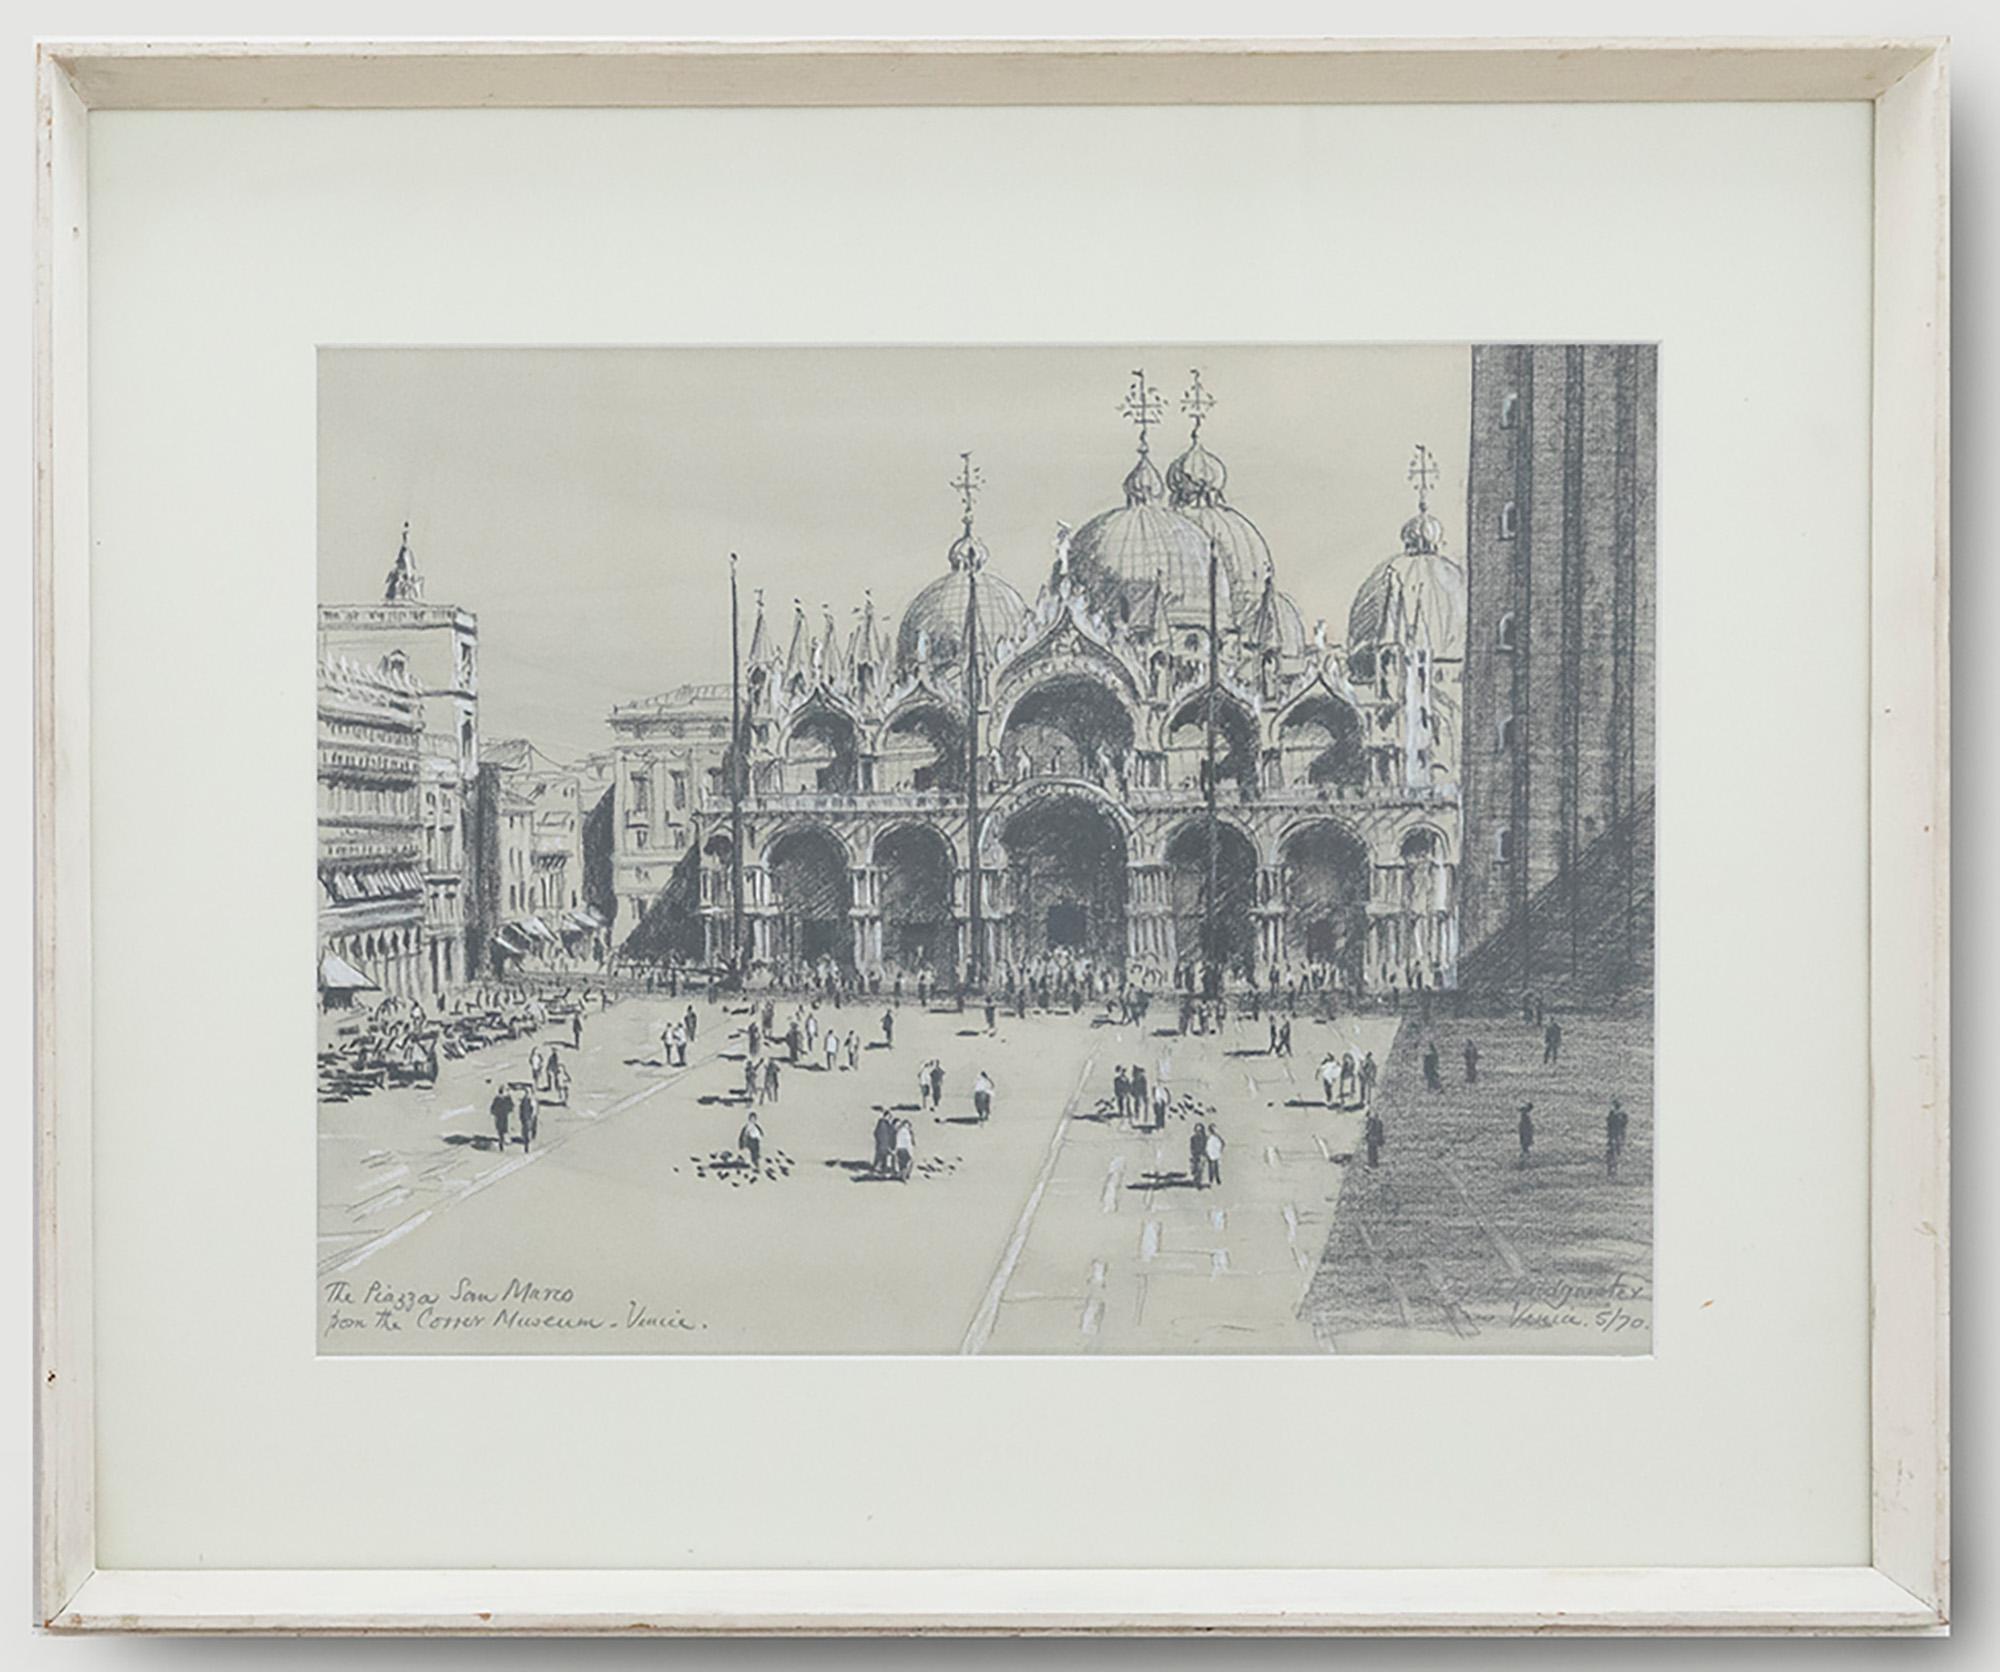 A striking perspective drawing of St Mark's Square by British artist Derek Bridgwater. Dominating the east end of the scene, St Mark's basilica sits with its grand domes and Romanesque carvings. In the foreground tourists can be seen gathered at the